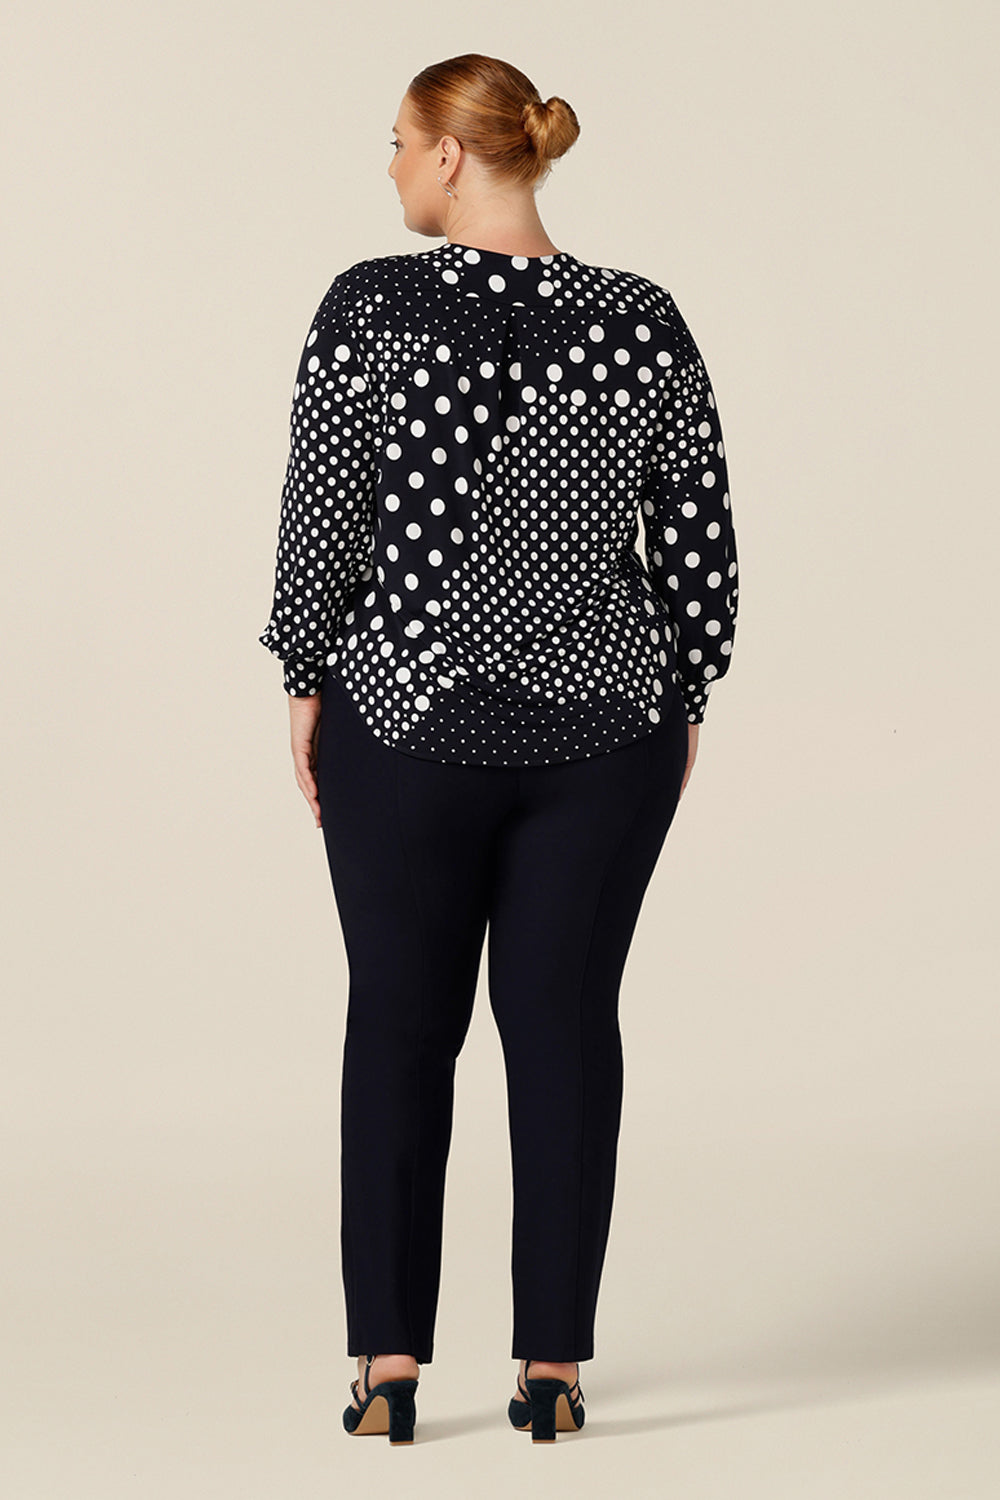 Back view of a size 18, plus size woman wearing a long sleeve, V-neck top in navy and white polka dot print jersey. A good top for work and casual wear, shop this top online in an inclusive size range of 8-24.